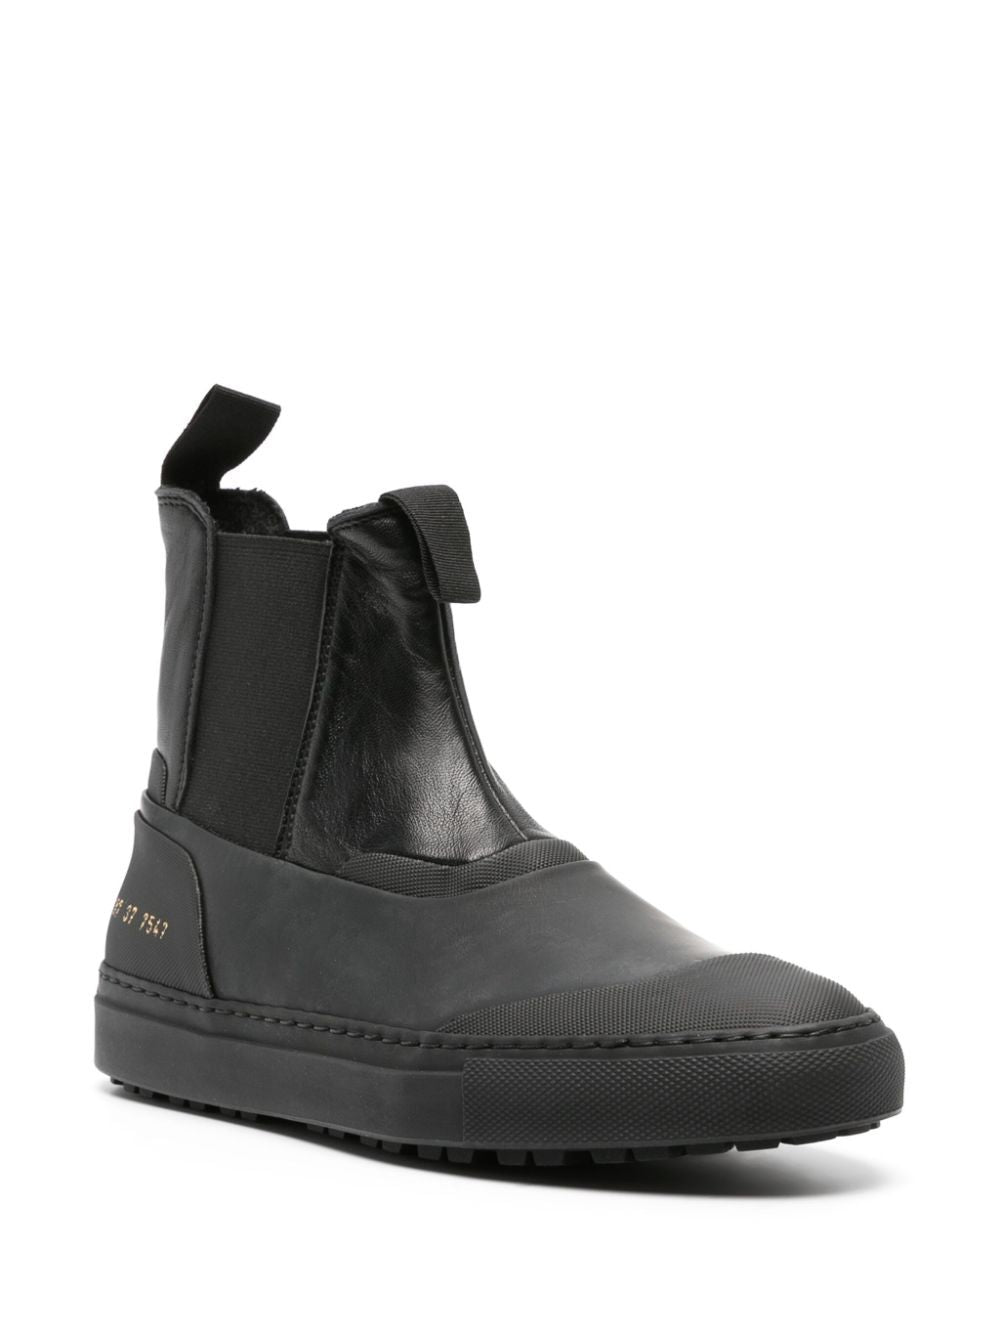 Black Chelsea Special Edition Boots for Women